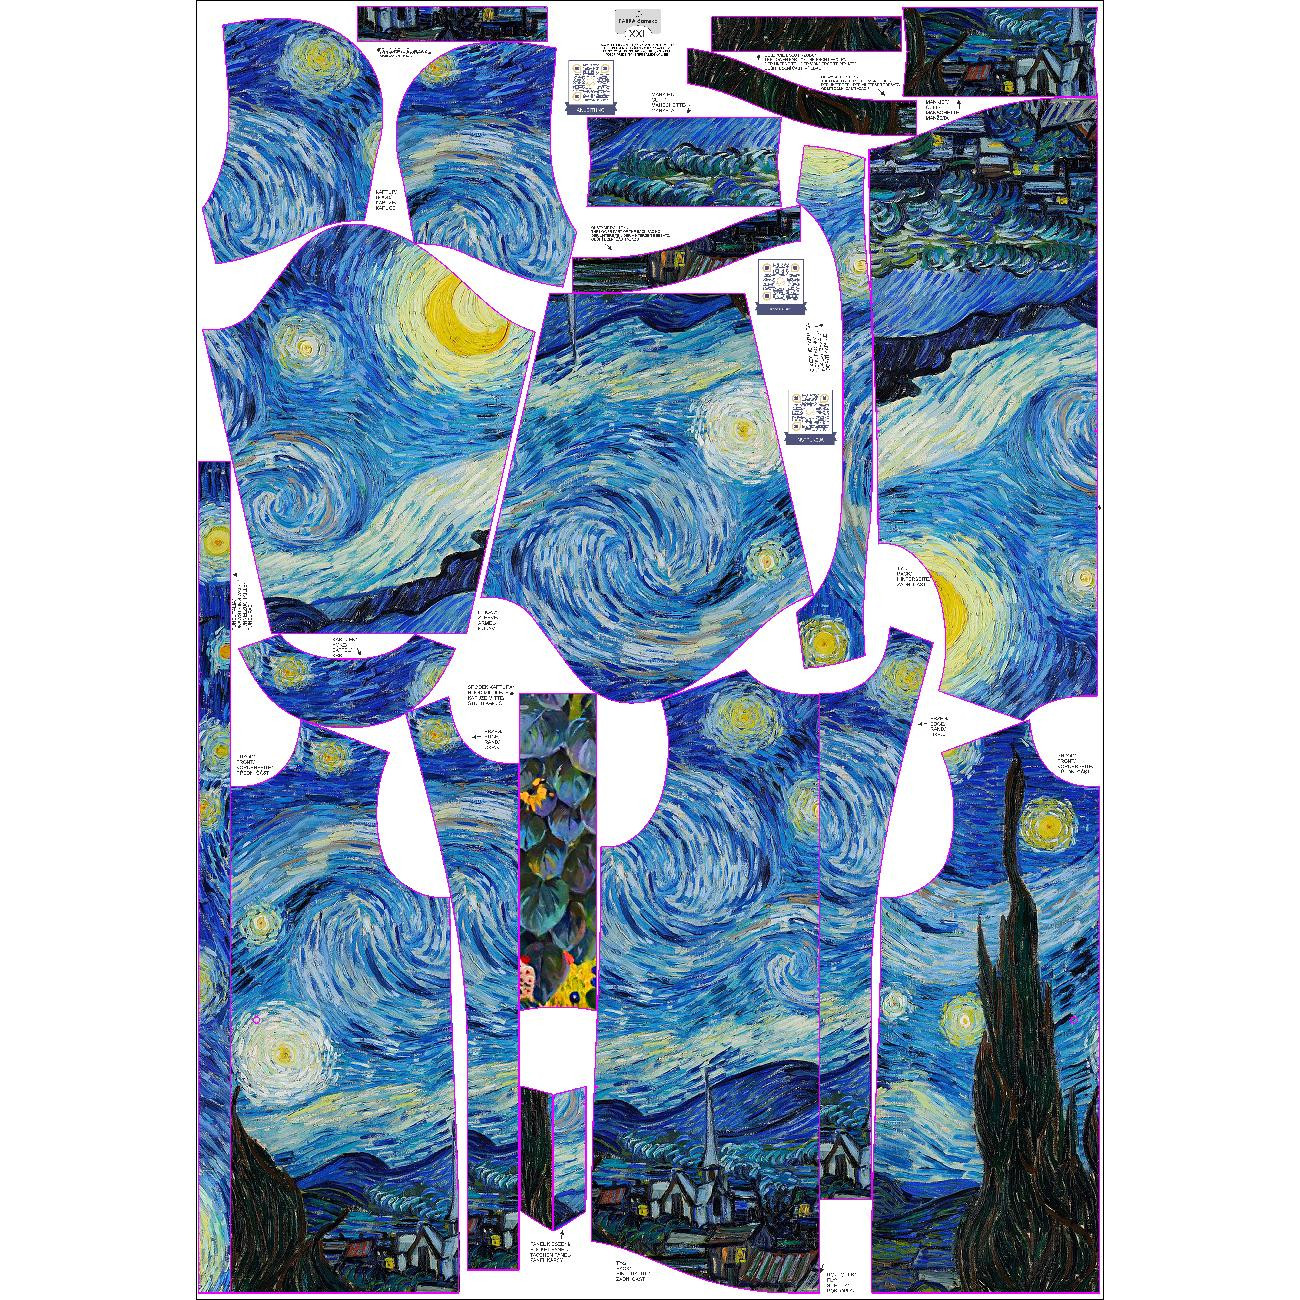 WOMEN'S PARKA (ANNA) - THE STARRY NIGHT (Vincent van Gogh) - sewing set